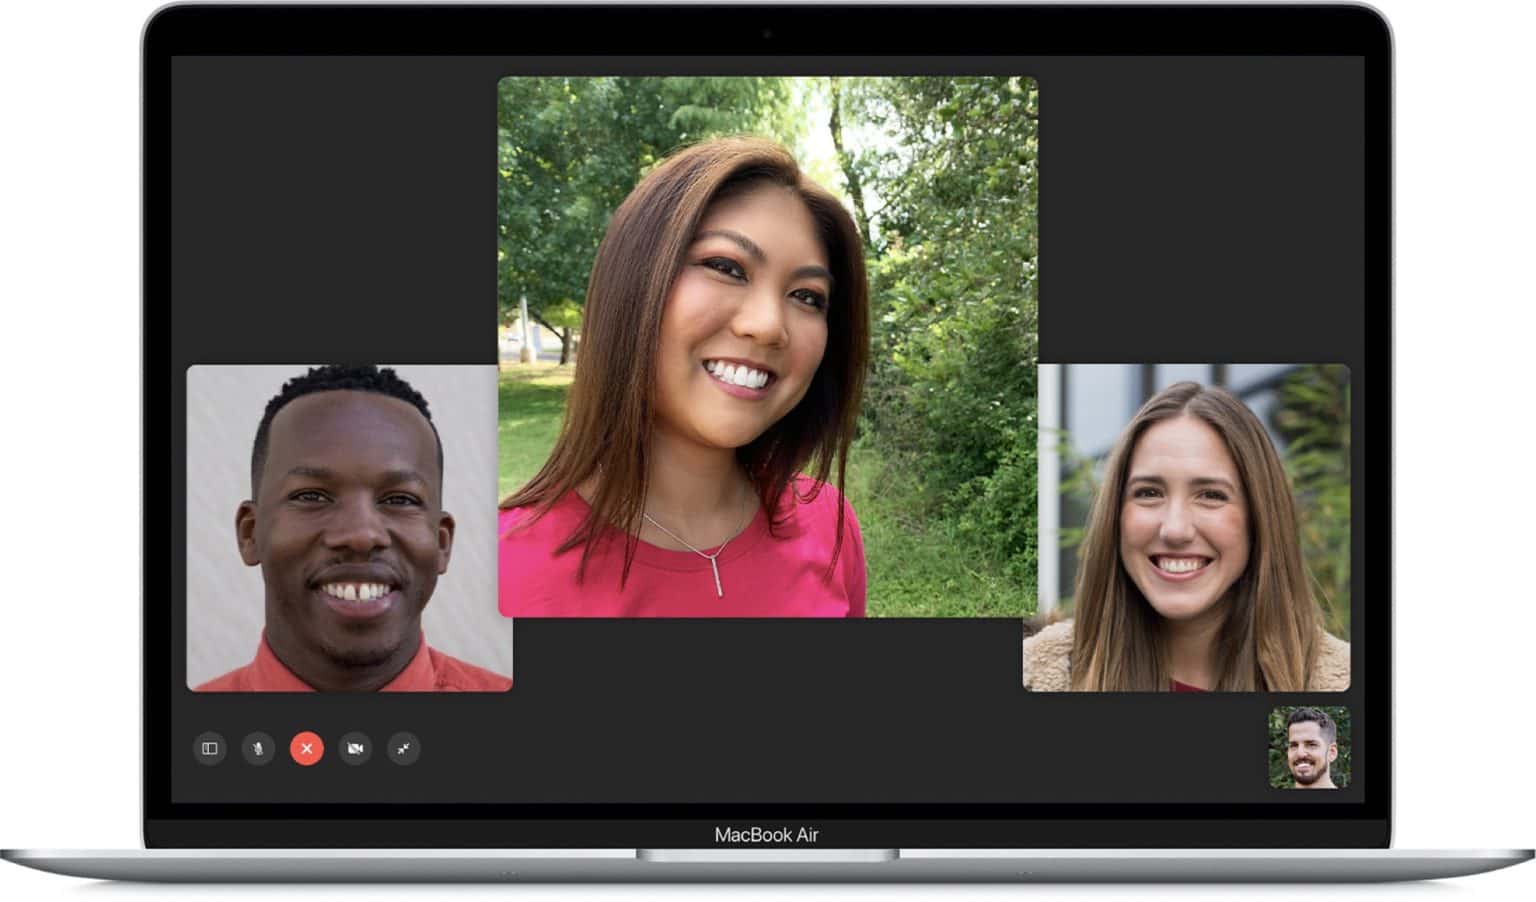 A Group FaceTime call on the Mac.